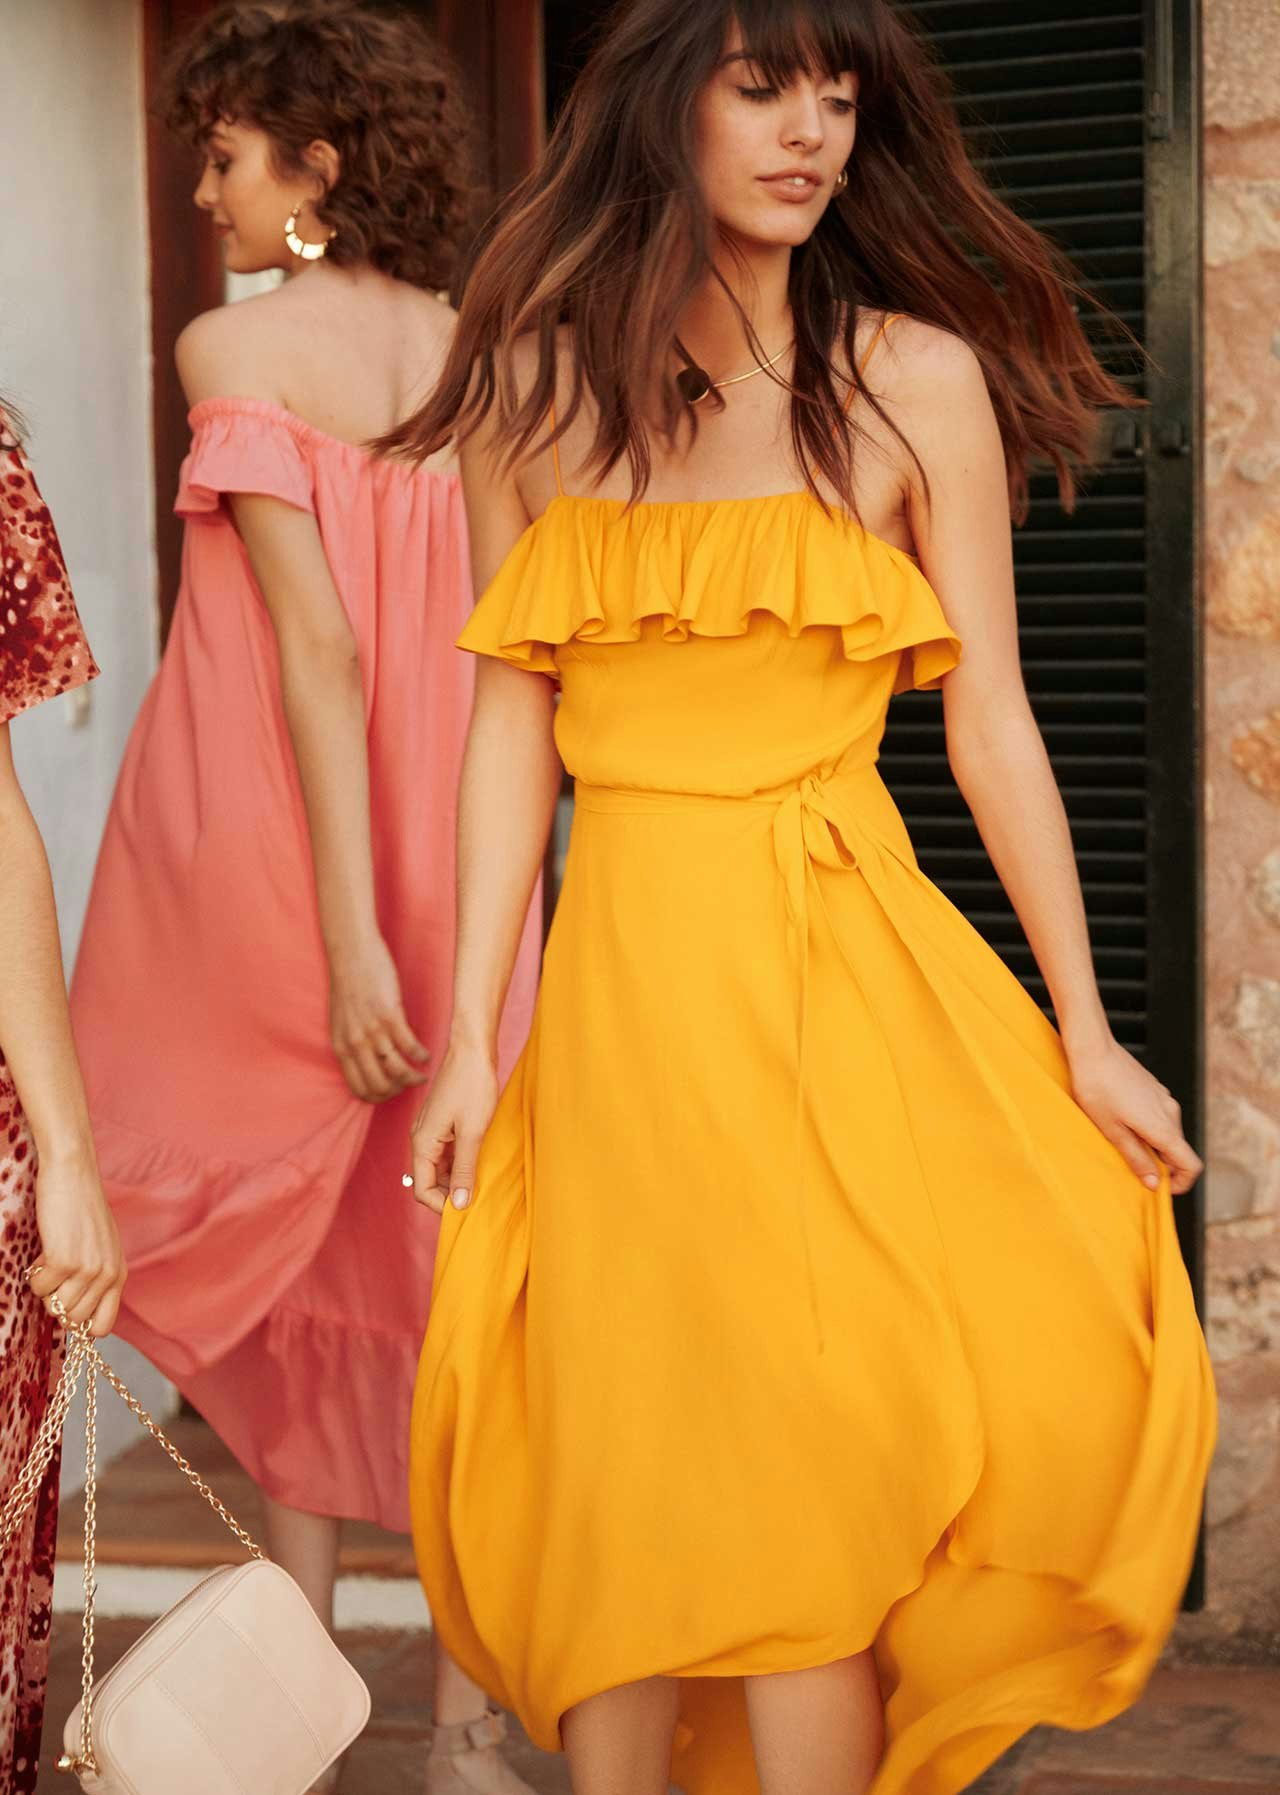 & other stories bridesmaid dresses